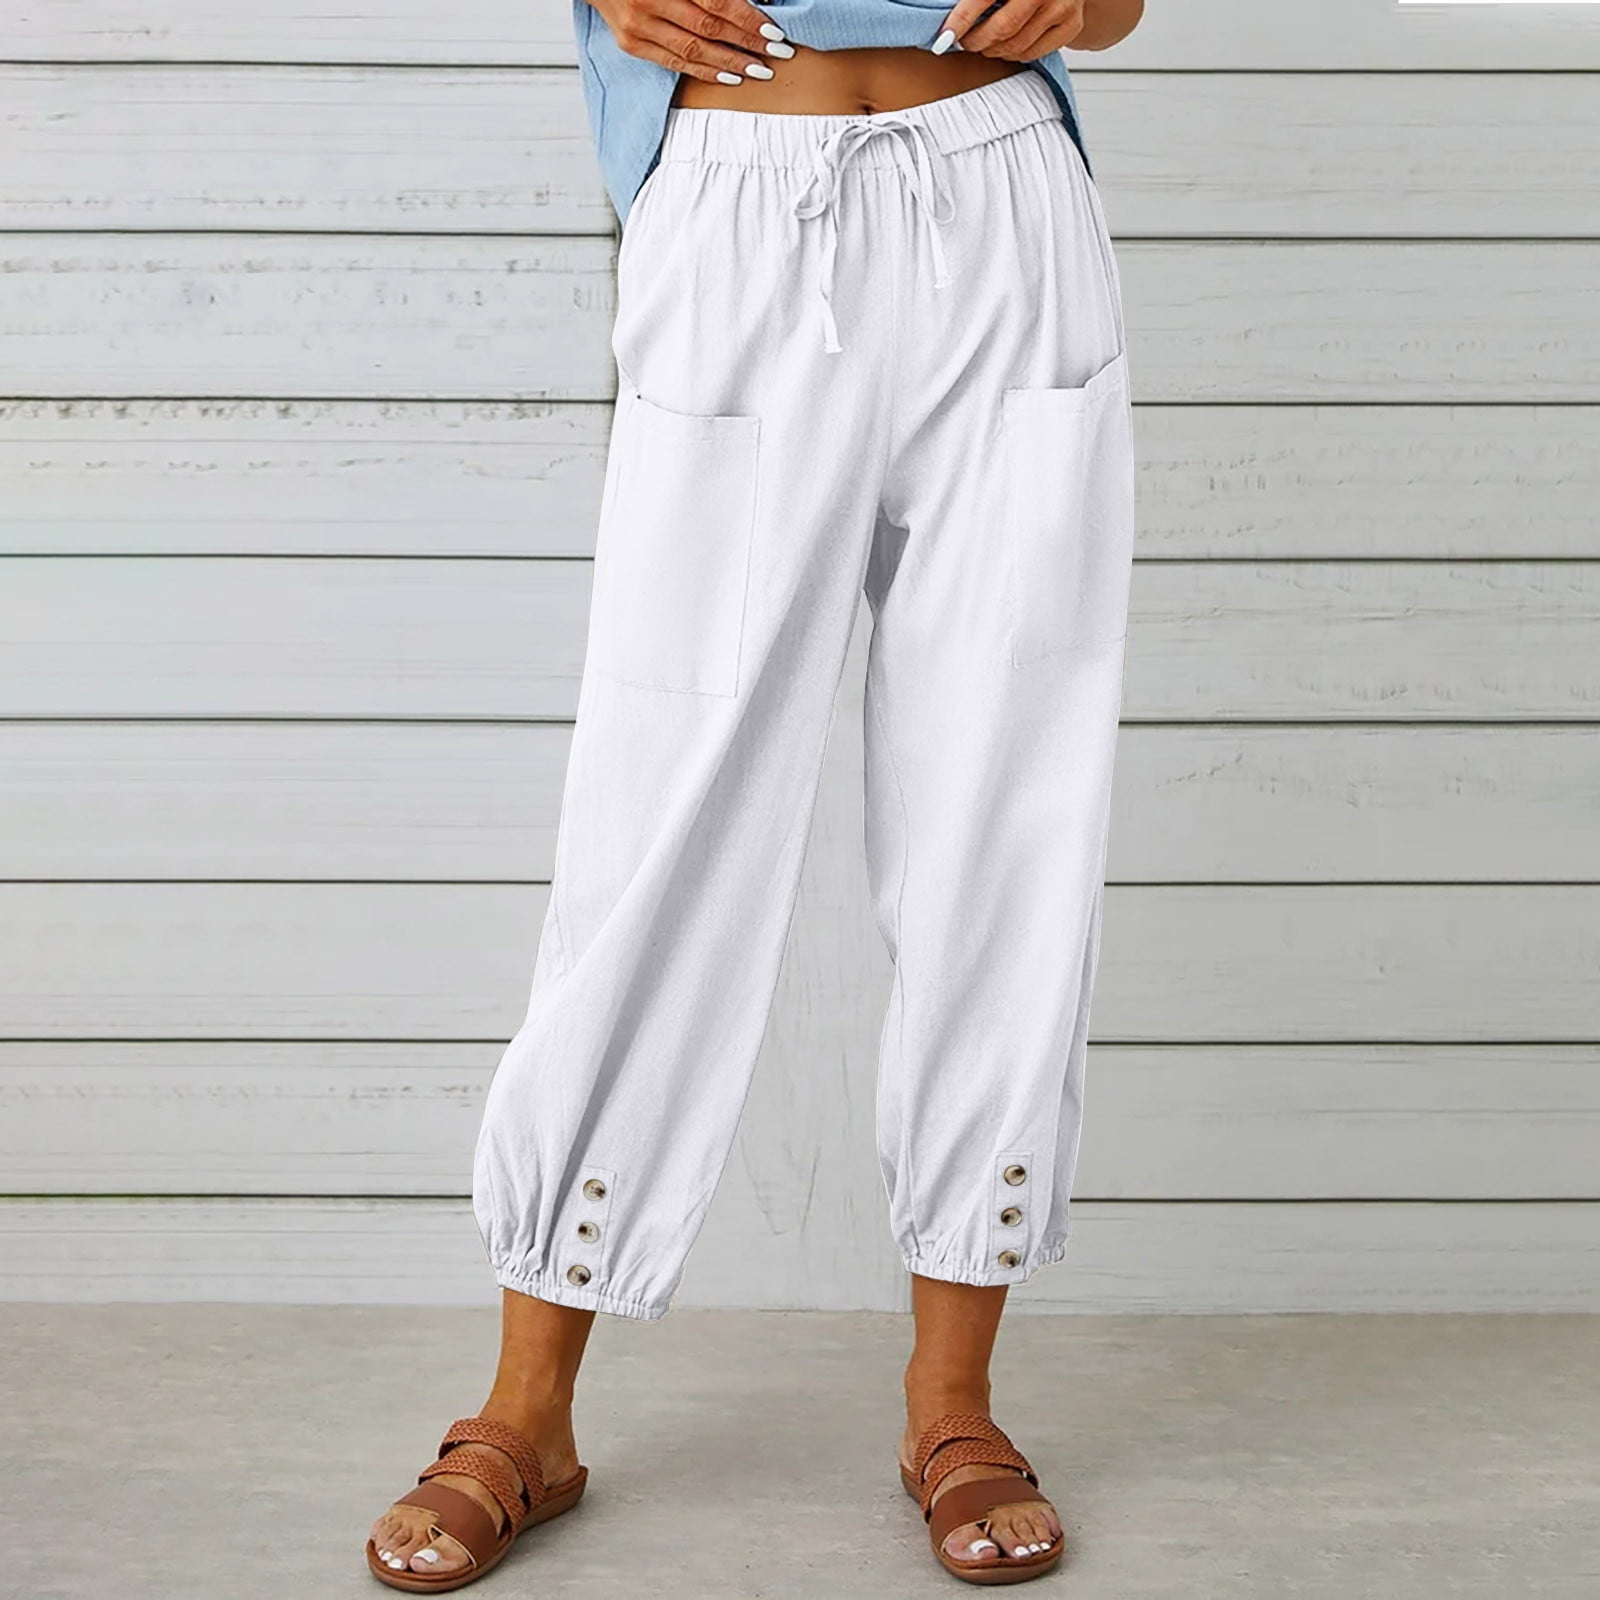 Women's Casual Capris Cotton and Linen Drawstring Solid Summer